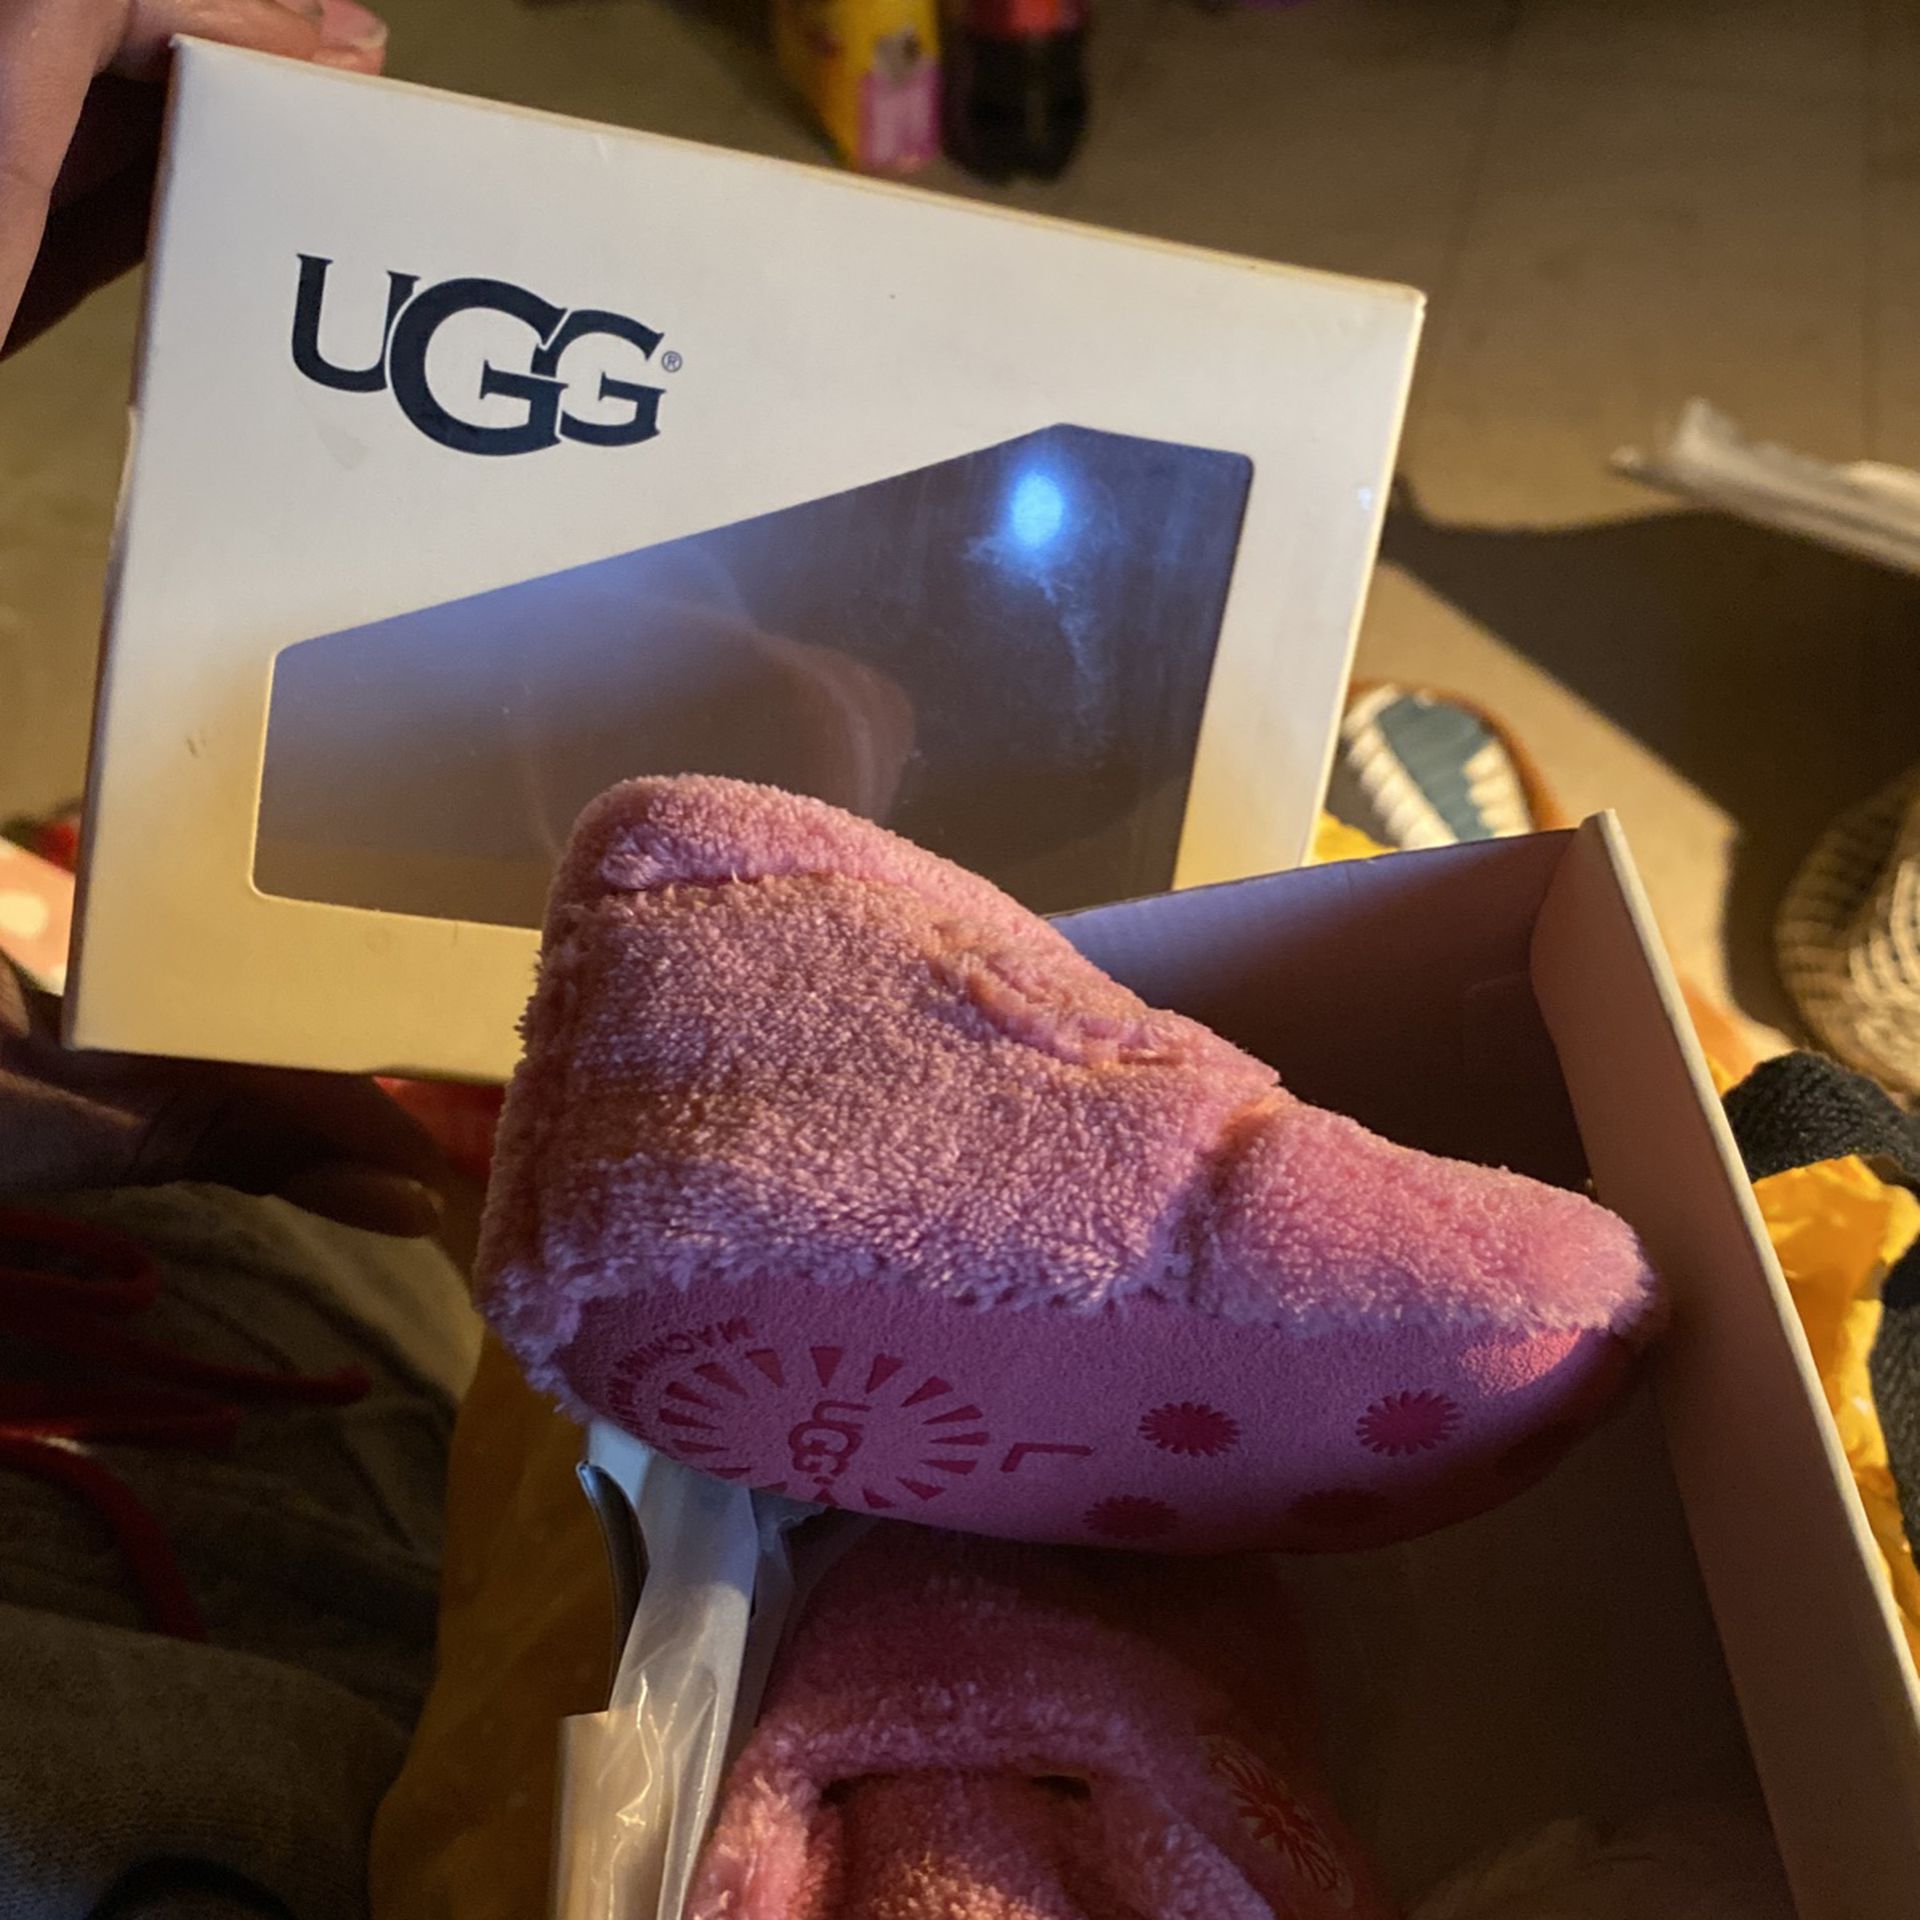 Ugg’s For Bby